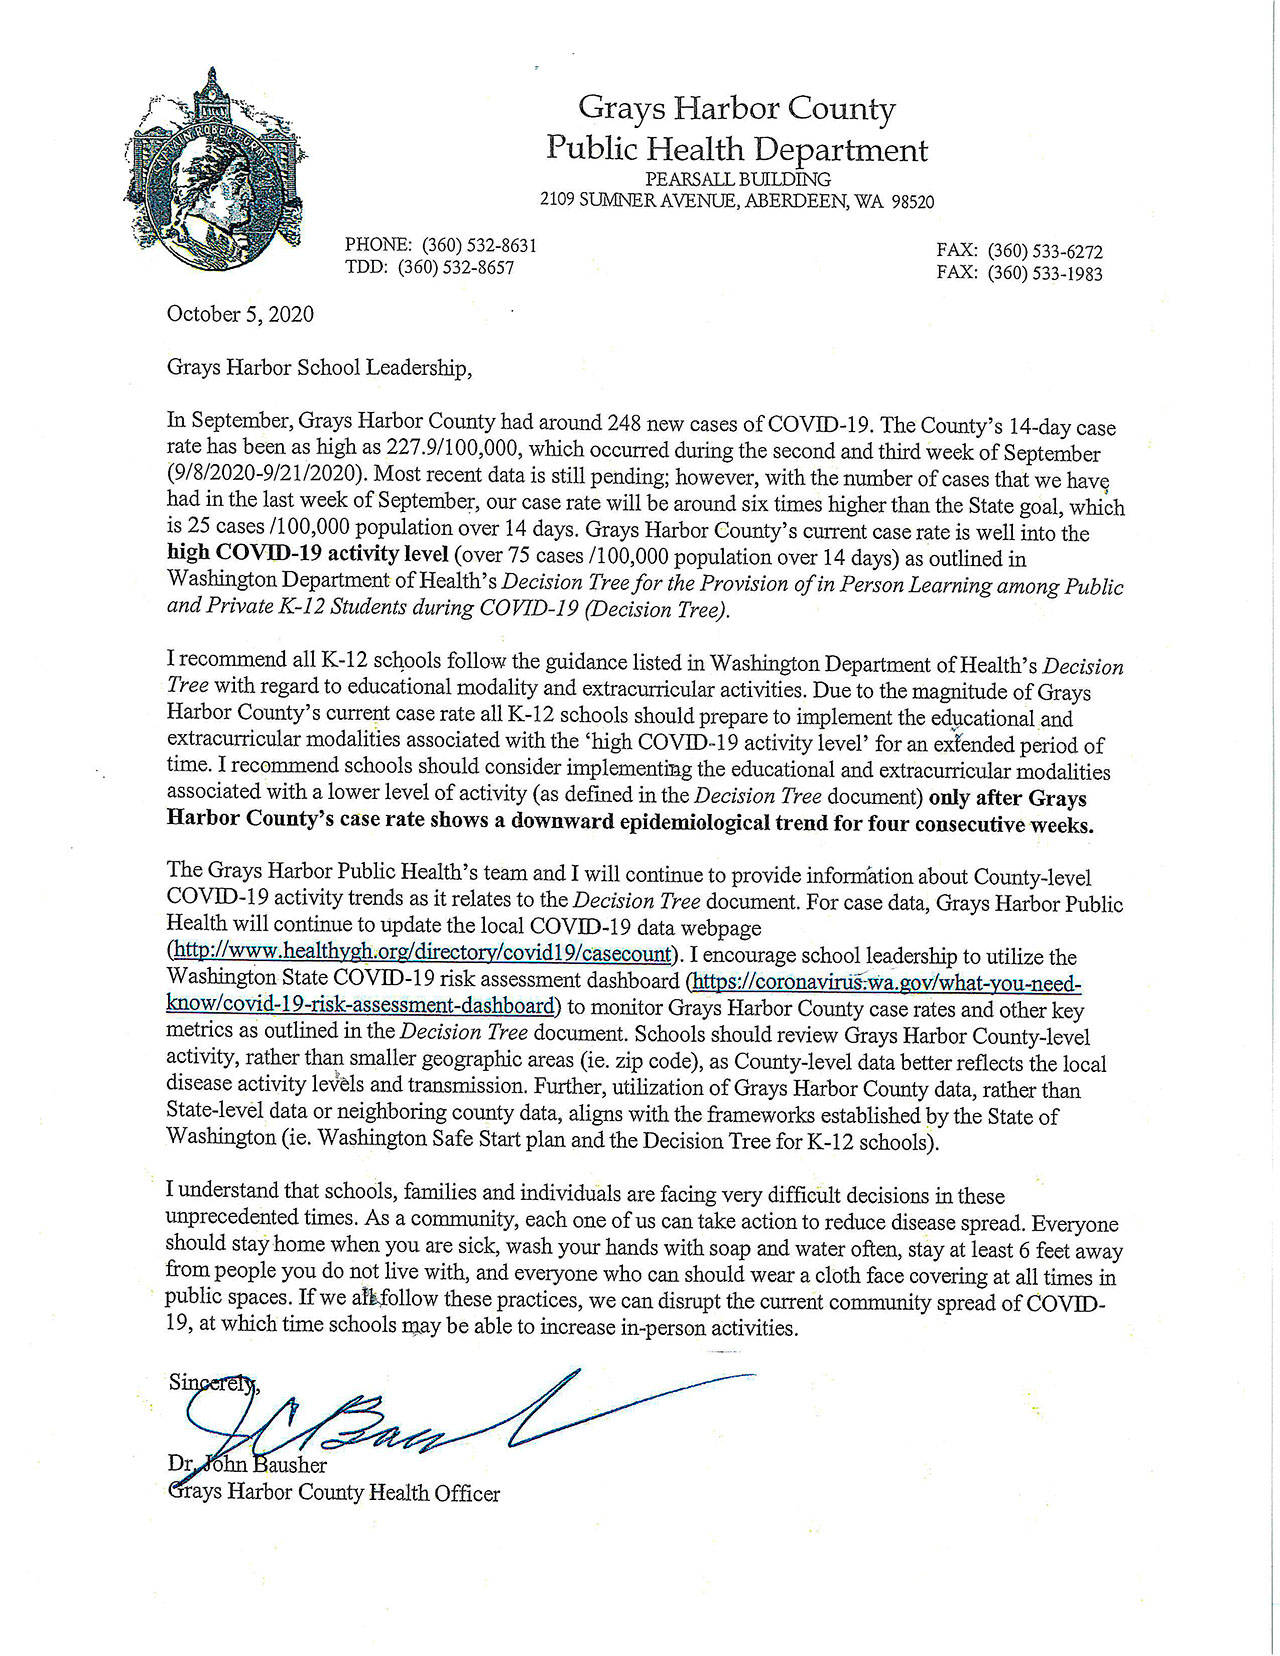 Dr. John Bausher’s letter to school officials telling them to plan on an extended period of online learning.